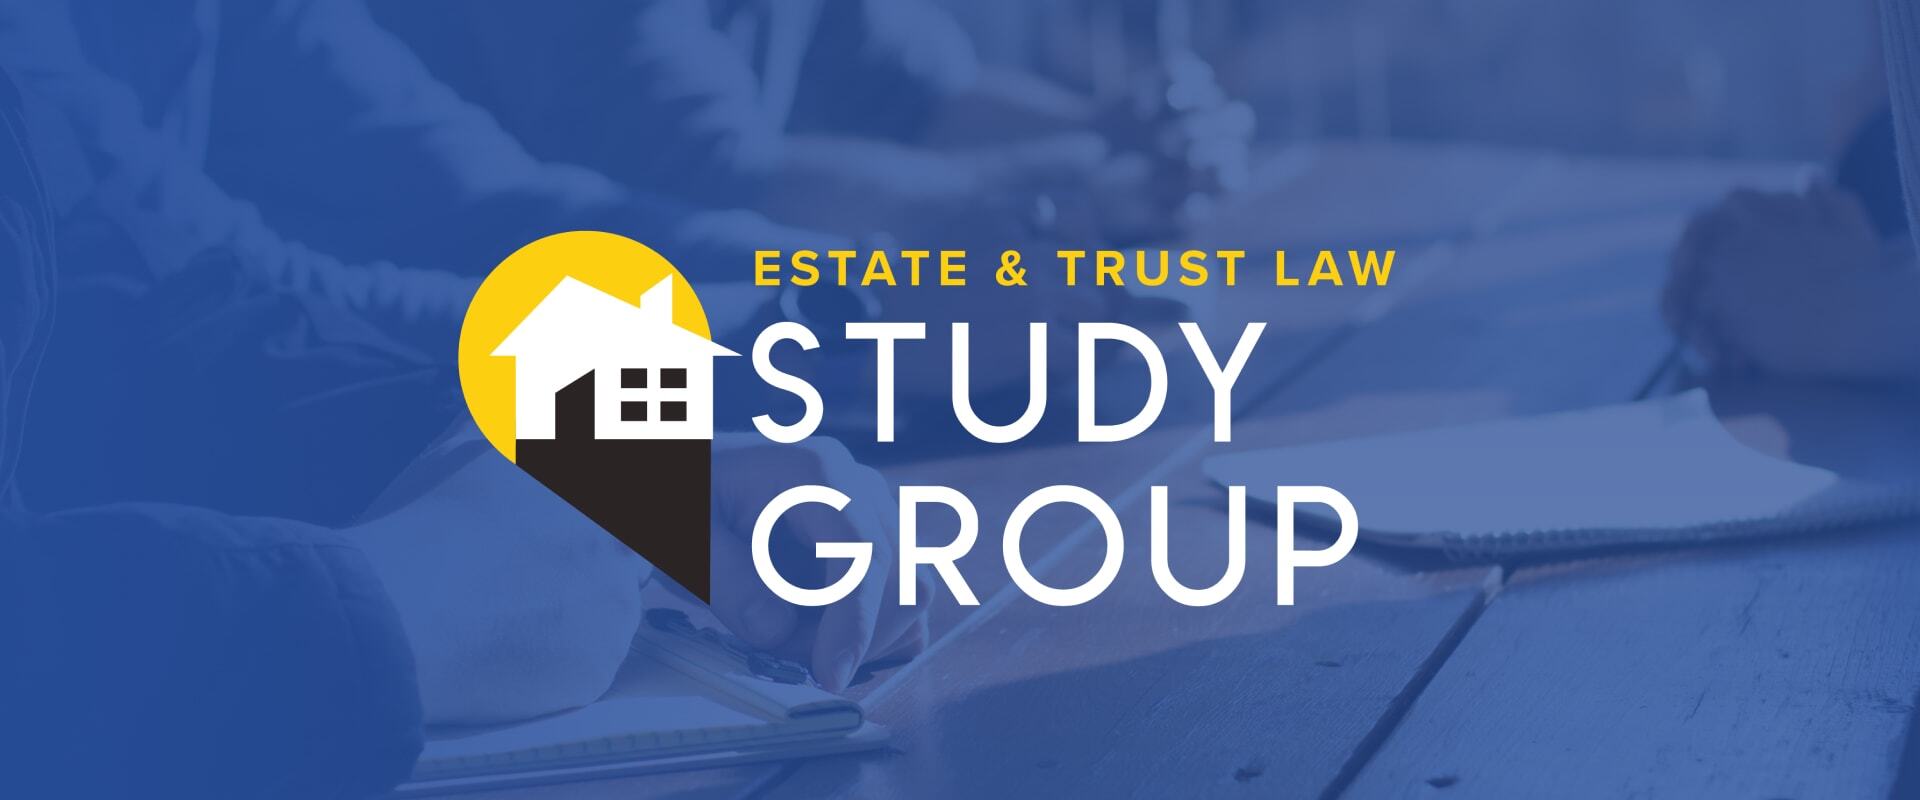 Estate & Trust logo and study group sign